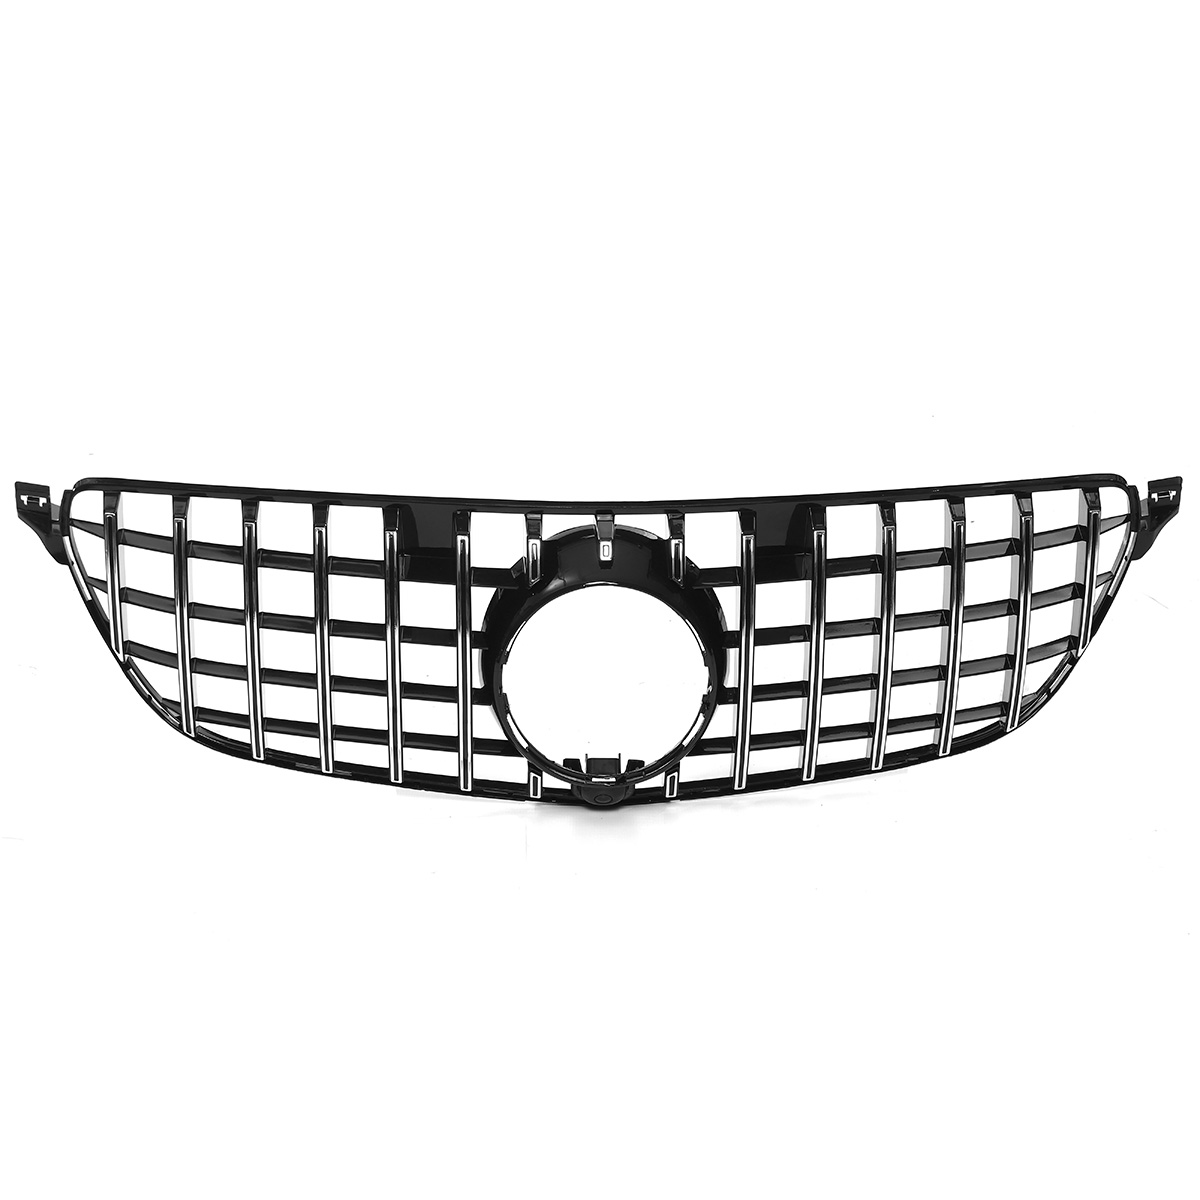 Silver SUV Front Bumper Grille GT R Type Grill for 2016-2018 Mercedes Benz GLE W166